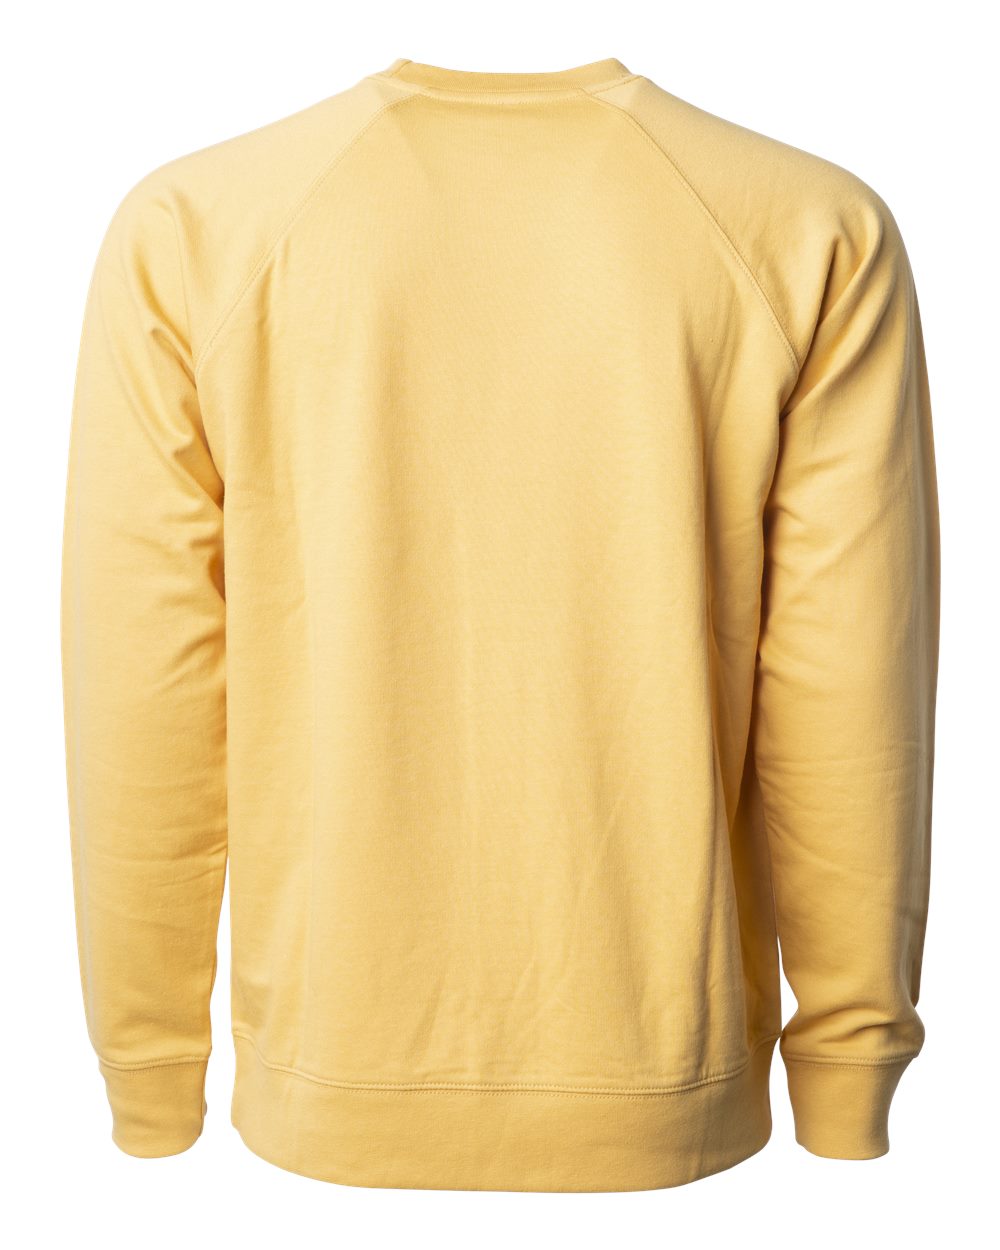 Independent Trading Co. Icon Unisex Lightweight Loopback Terry Crewneck Sweatshirt SS1000C #color_Harvest Gold